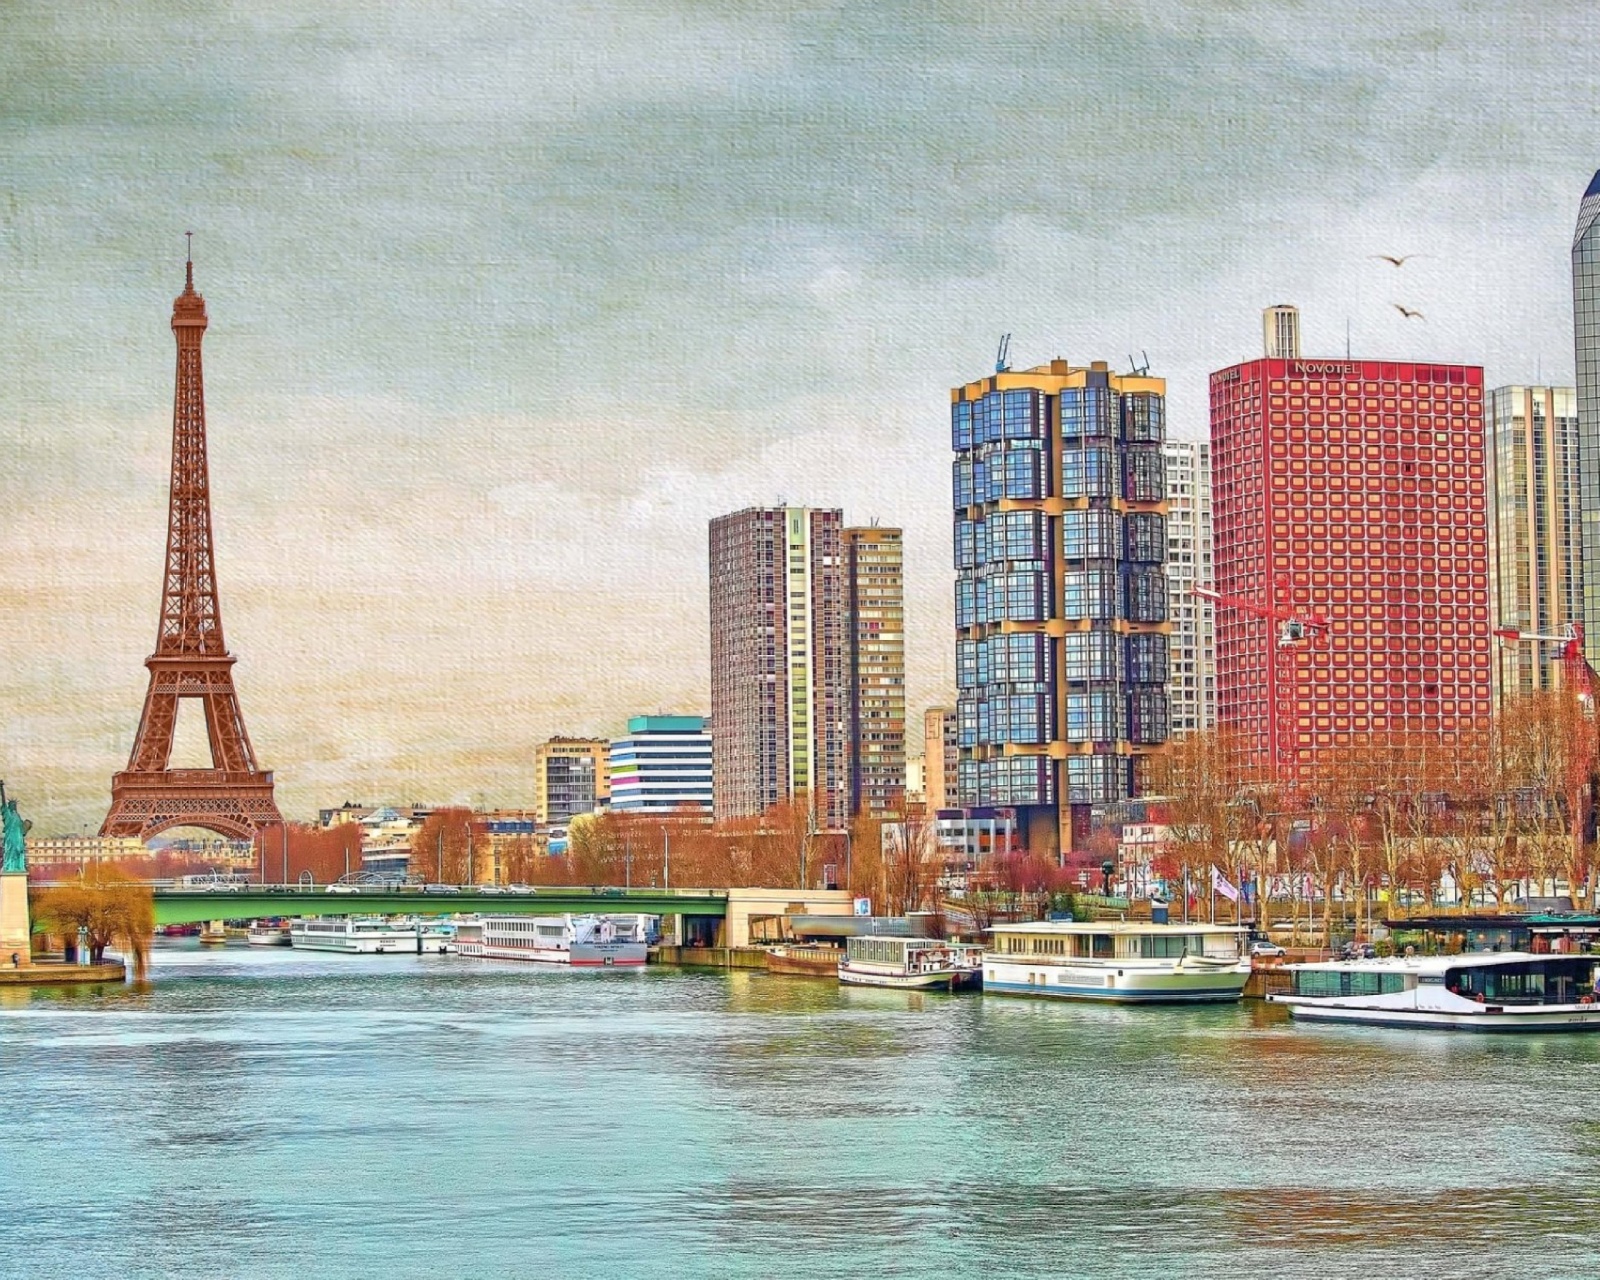 Eiffel Tower and Paris 16th District wallpaper 1600x1280